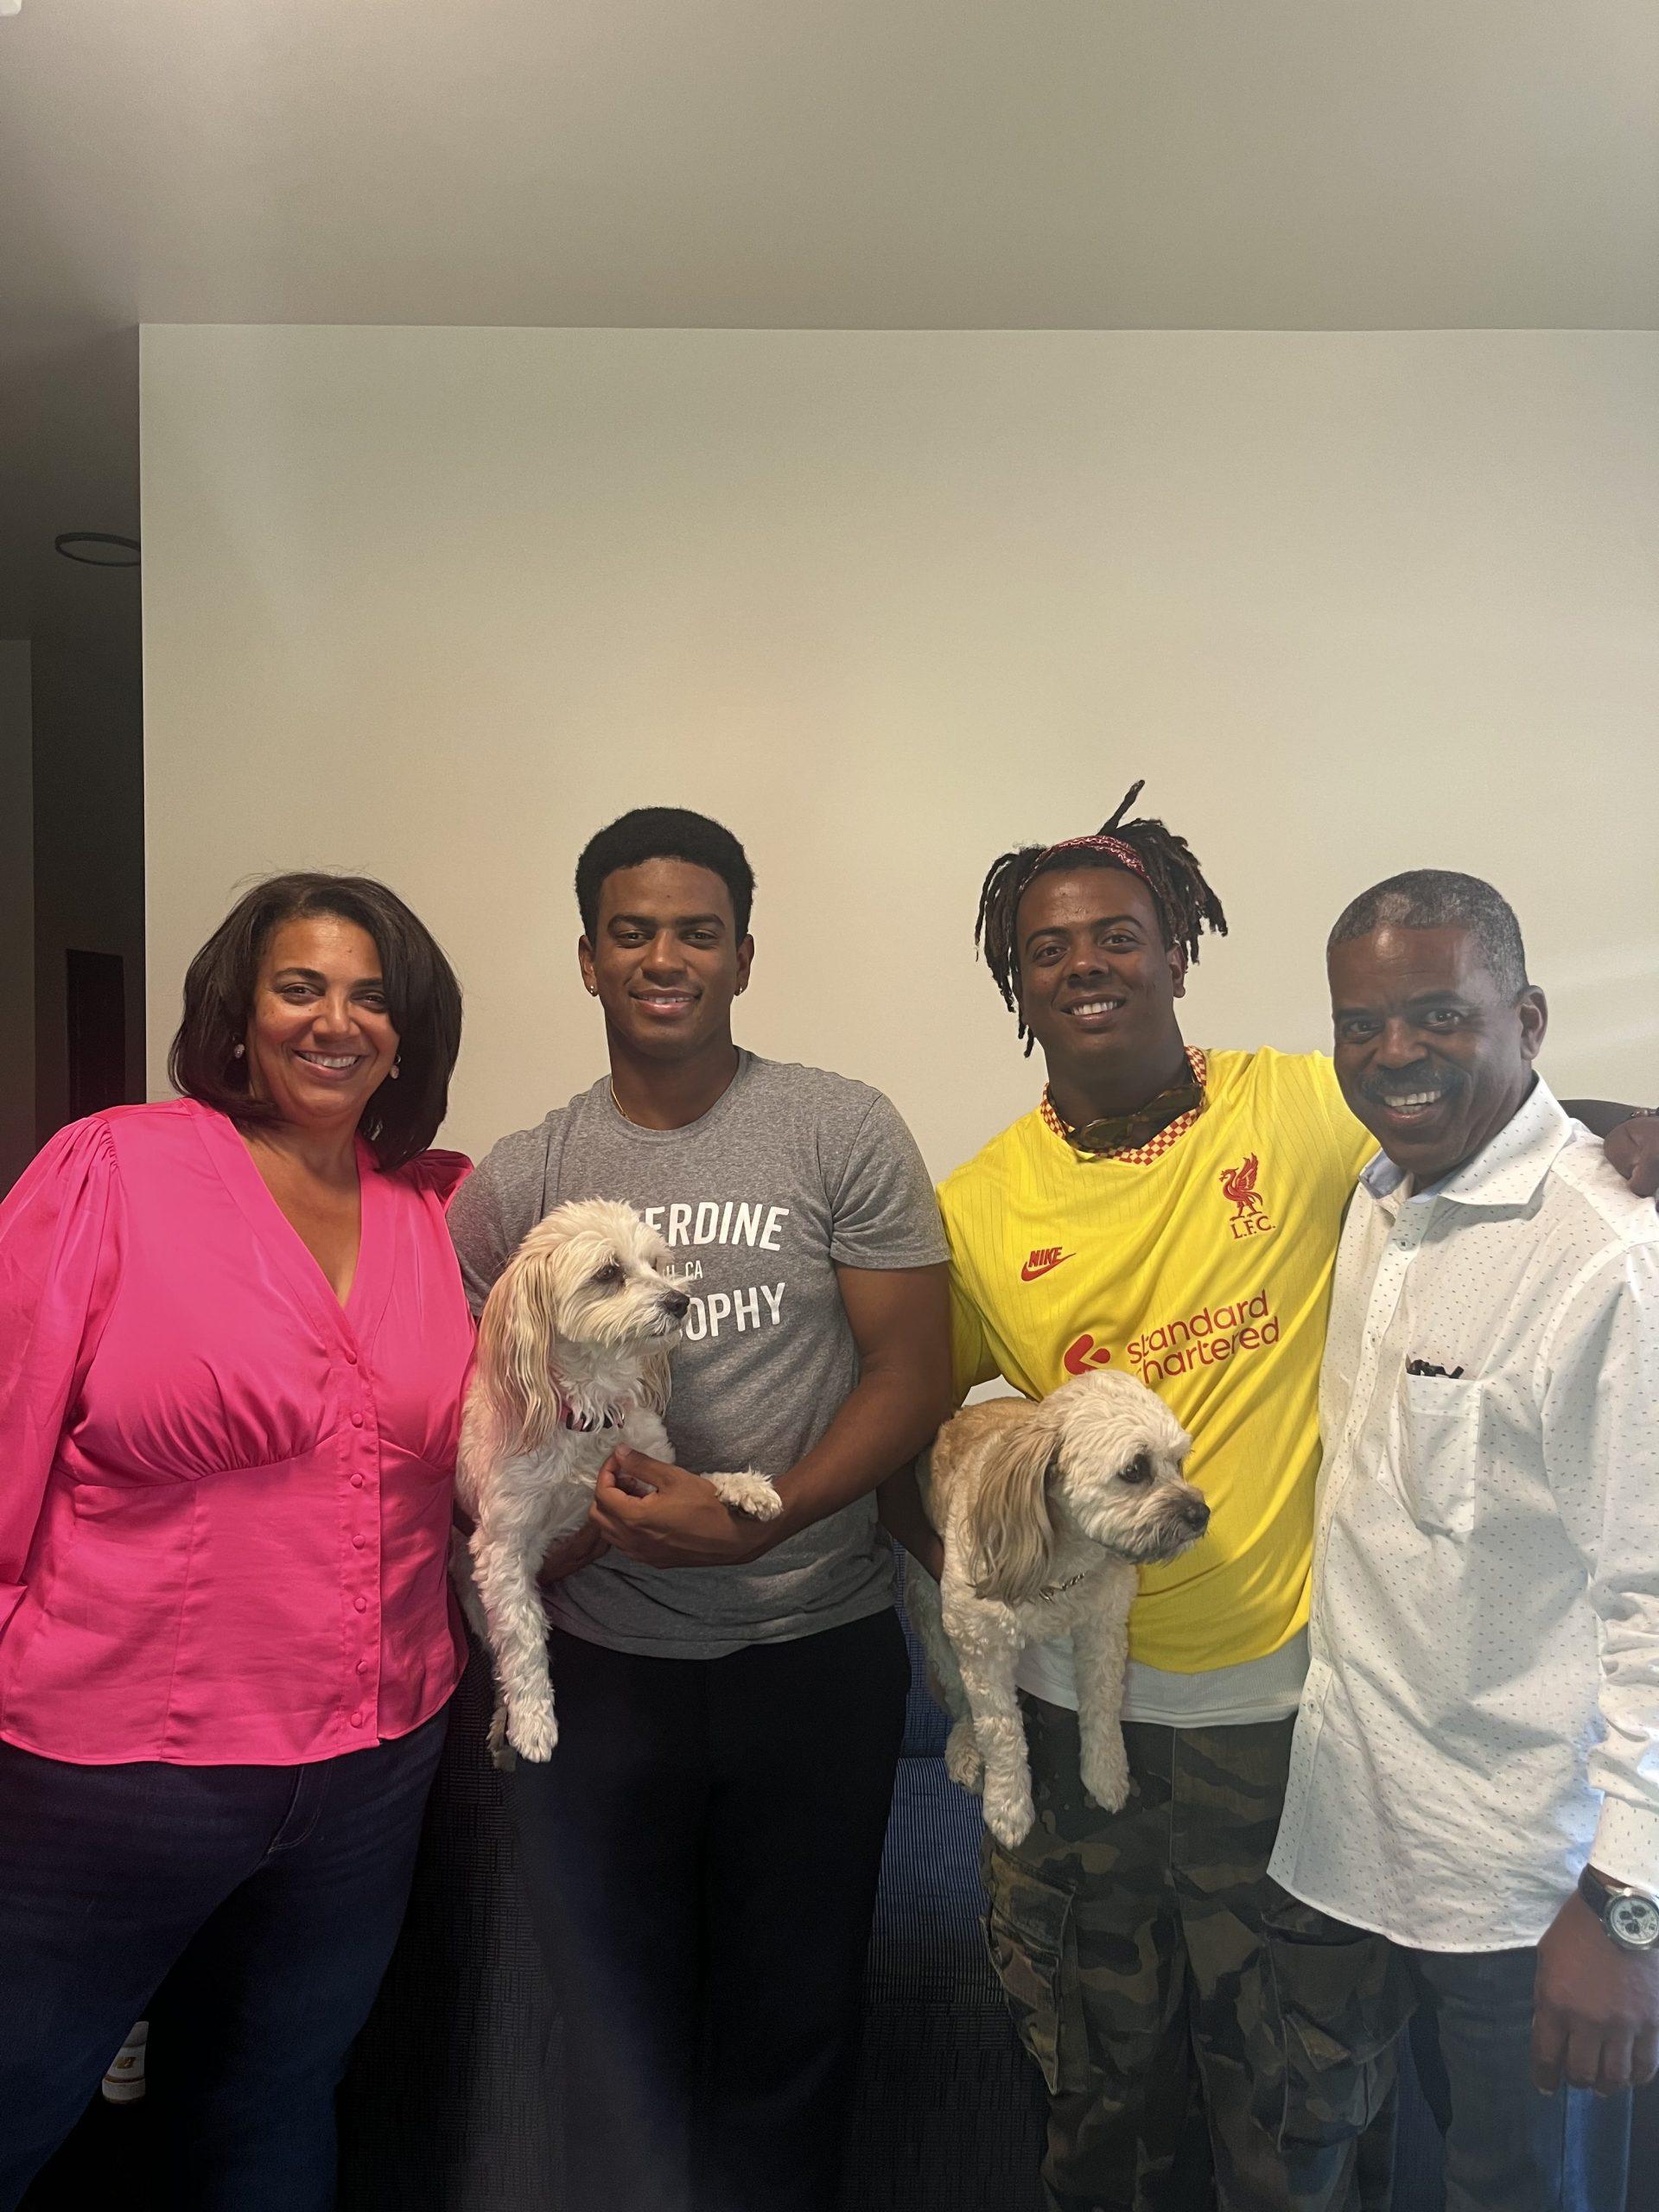 Nathan Thomas (second from the left) with his family and pets, taken at Seaside Residence Hall in Nov. 2023. Thomas said one of the benefits of living close to home is the ability to see his family more frequently. Photo courtesy of Nathan Thomas